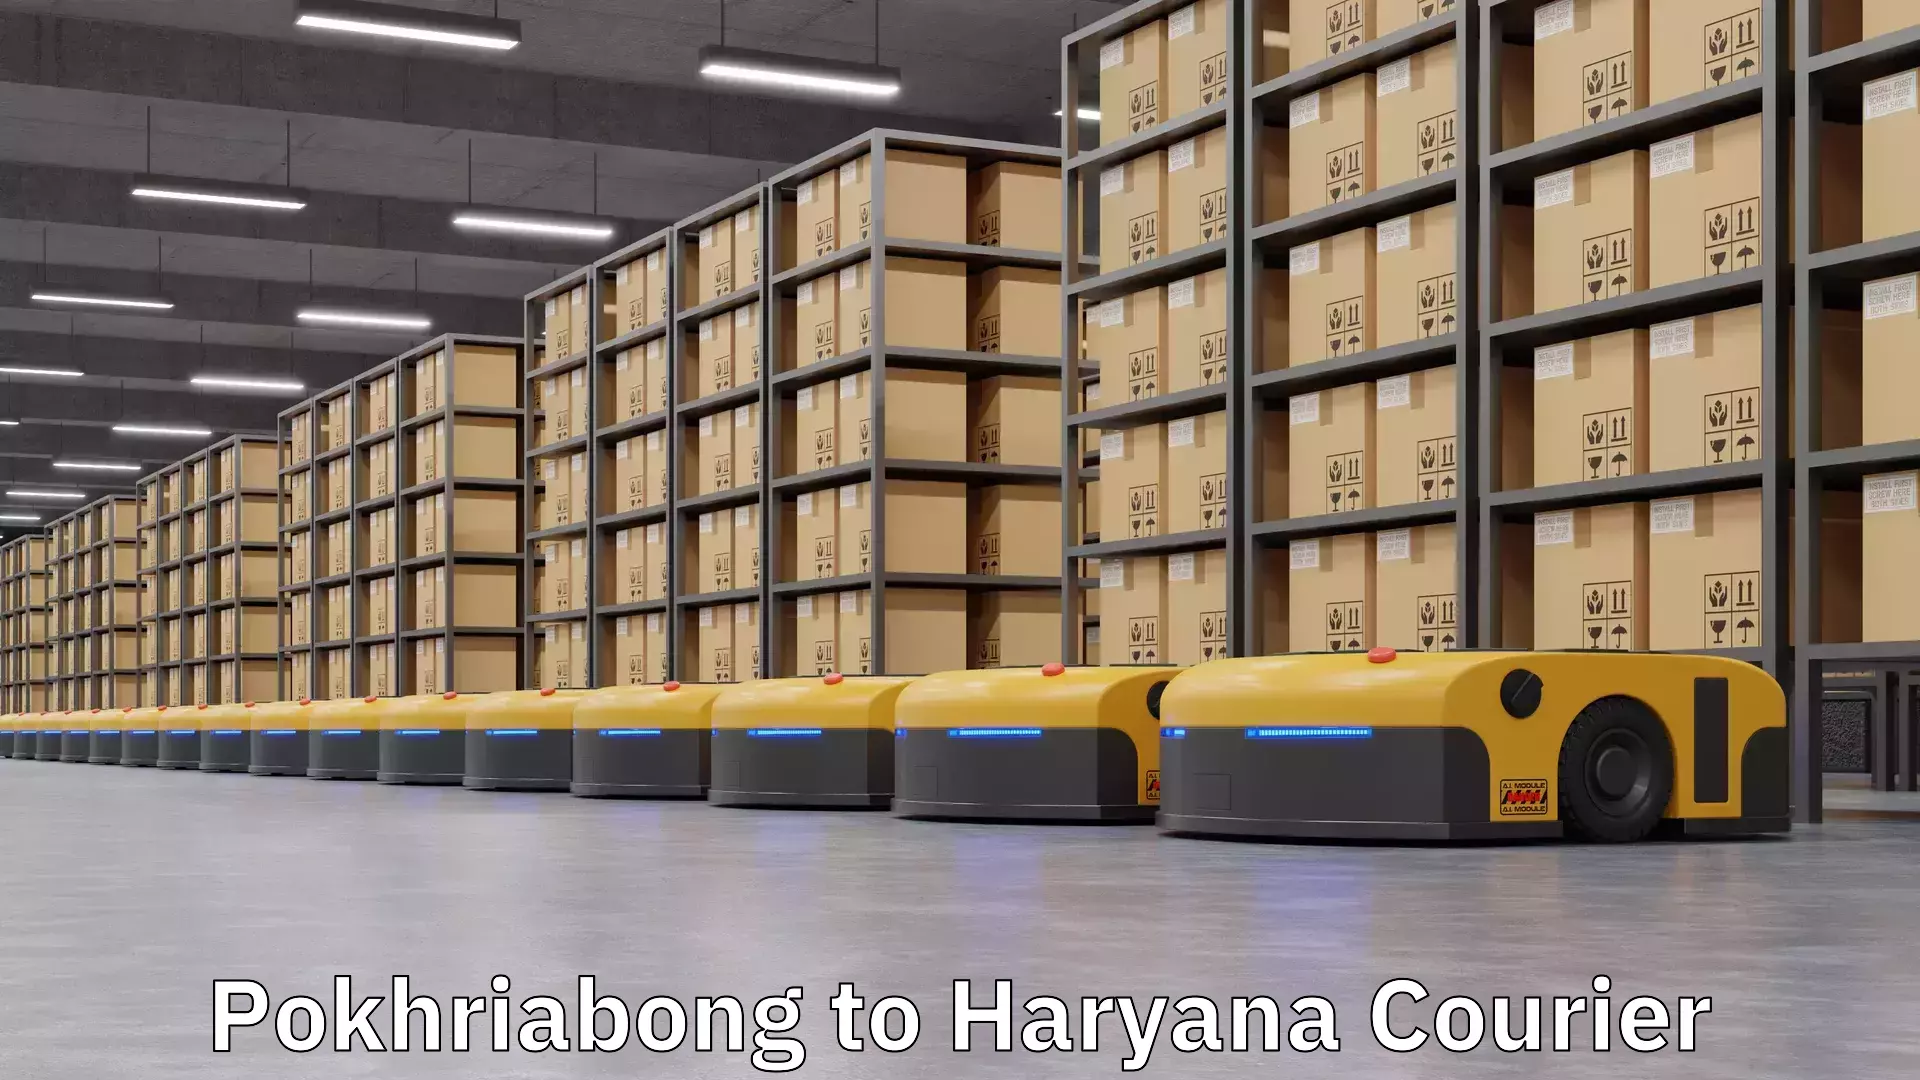 Express delivery capabilities Pokhriabong to Haryana